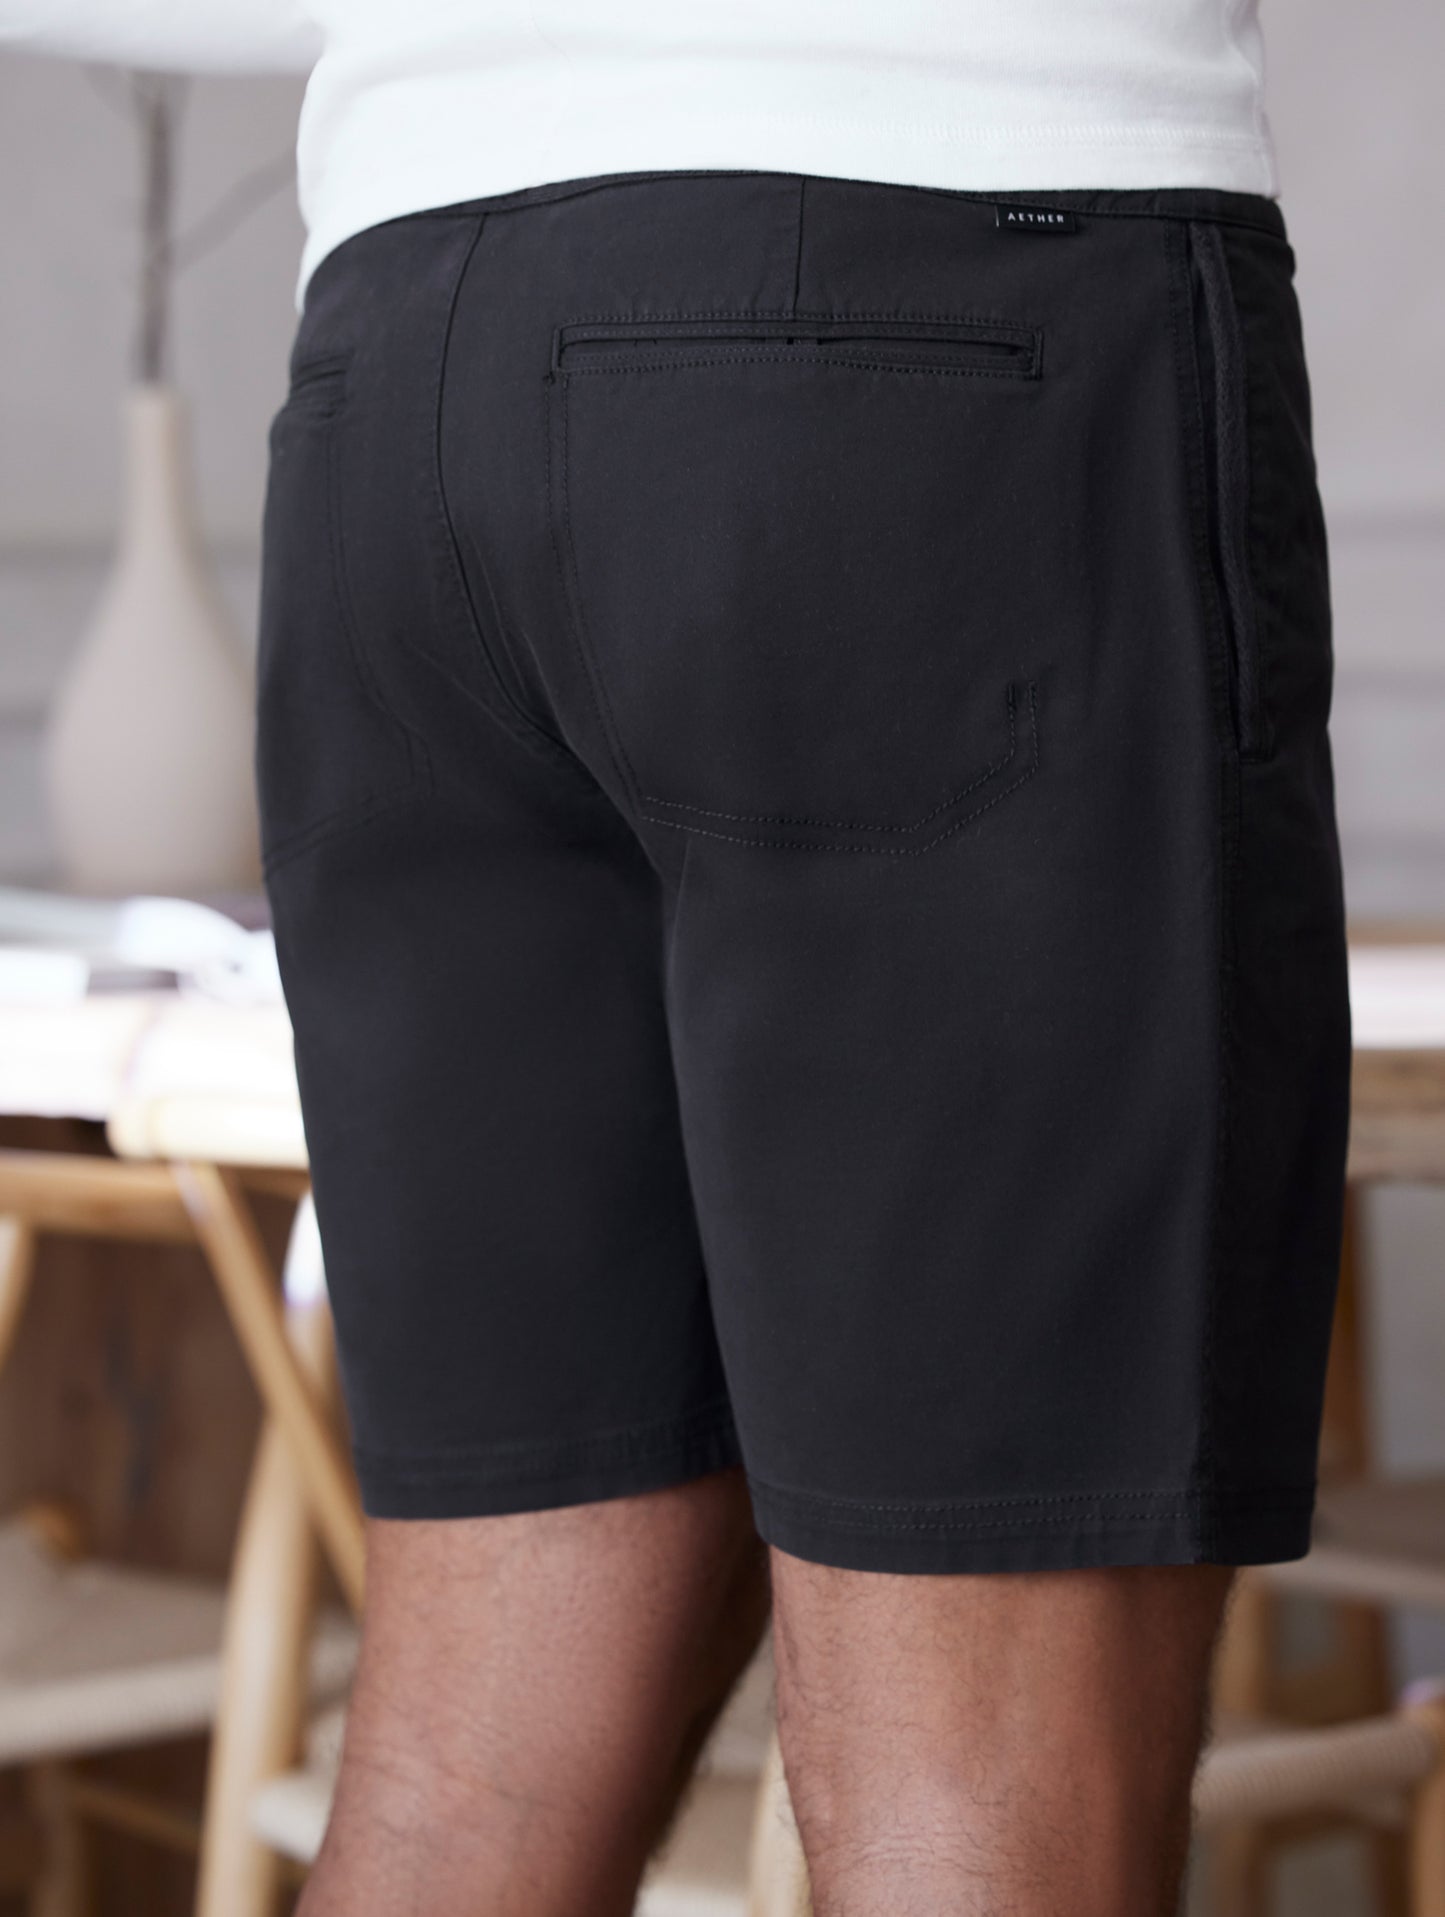 man wearing black shorts from AETHER Apparel.